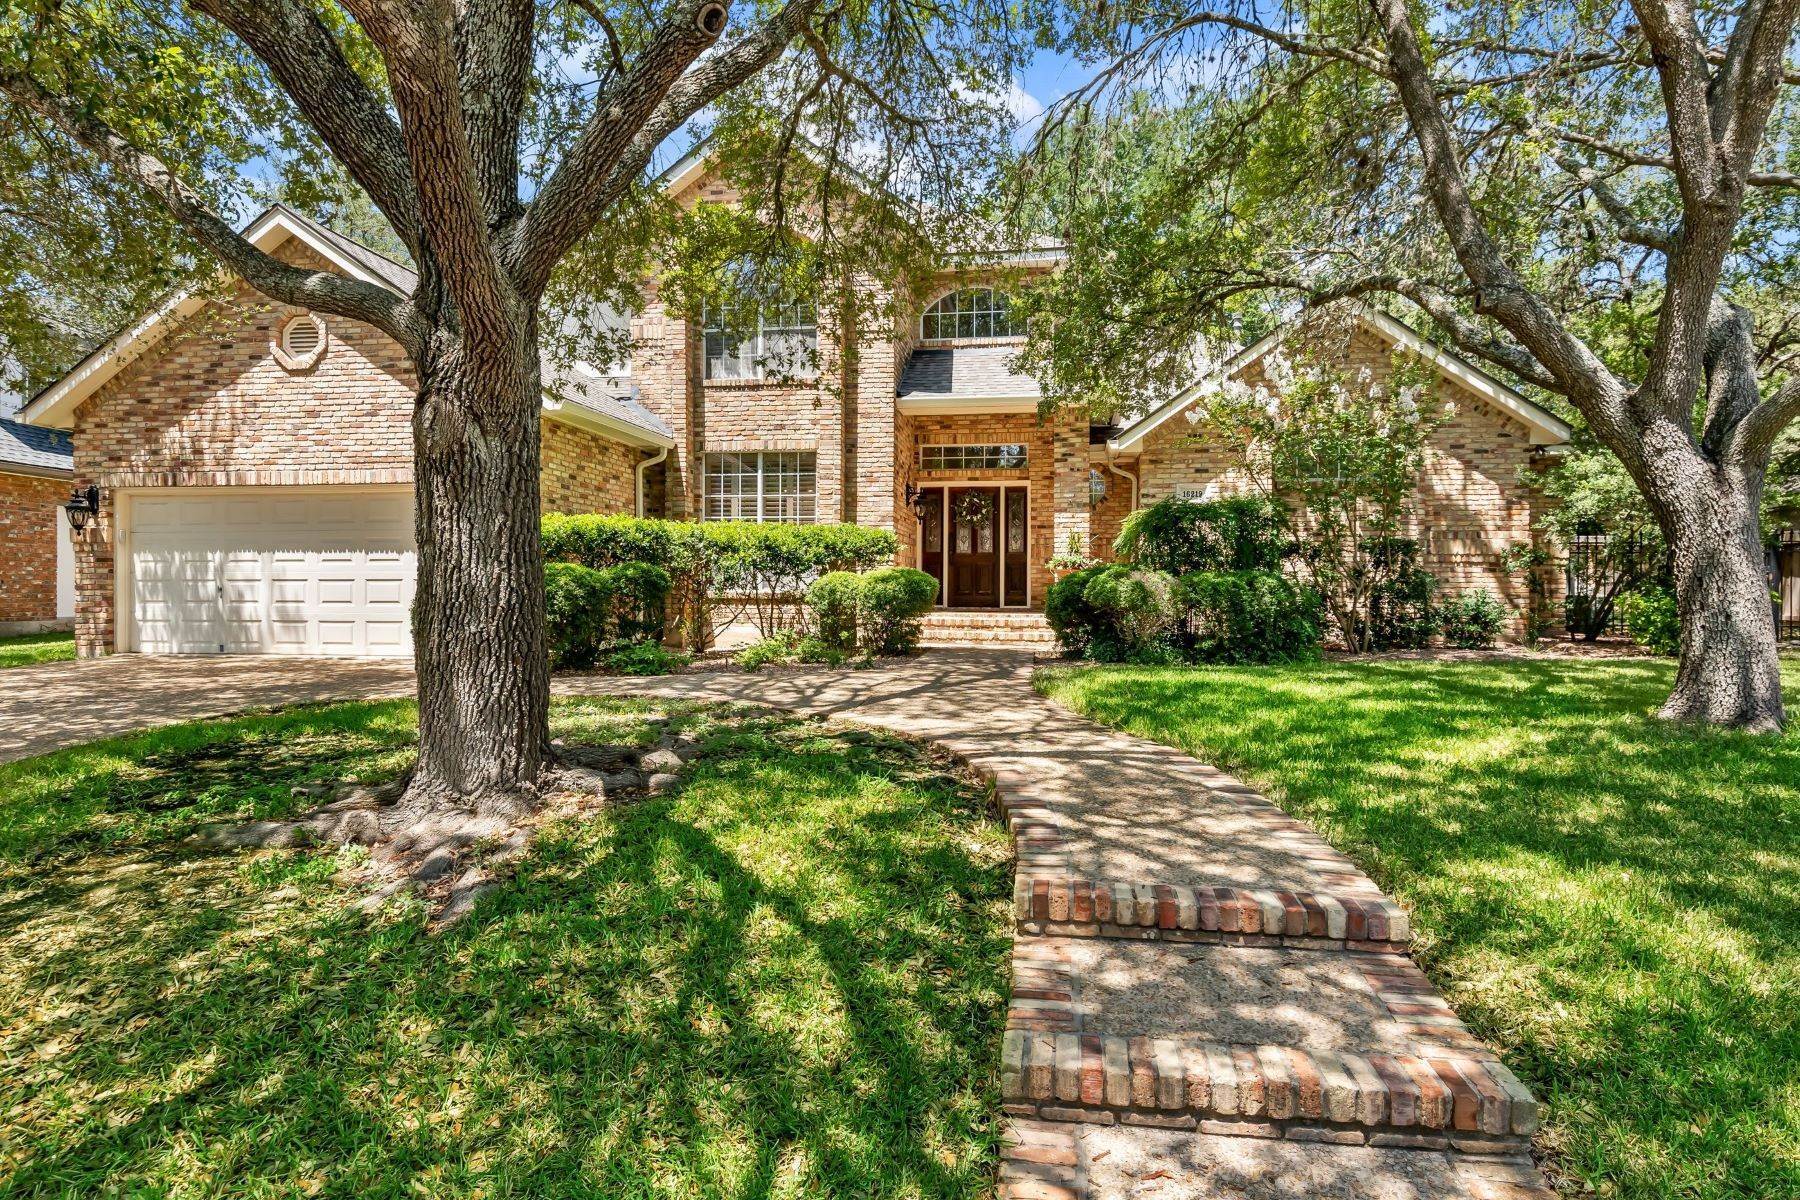 Single Family Homes for Sale at 16219 Robinwood Lane, San Antonio, TX 78248 16219 Robinwood Lane San Antonio, Texas 78248 United States